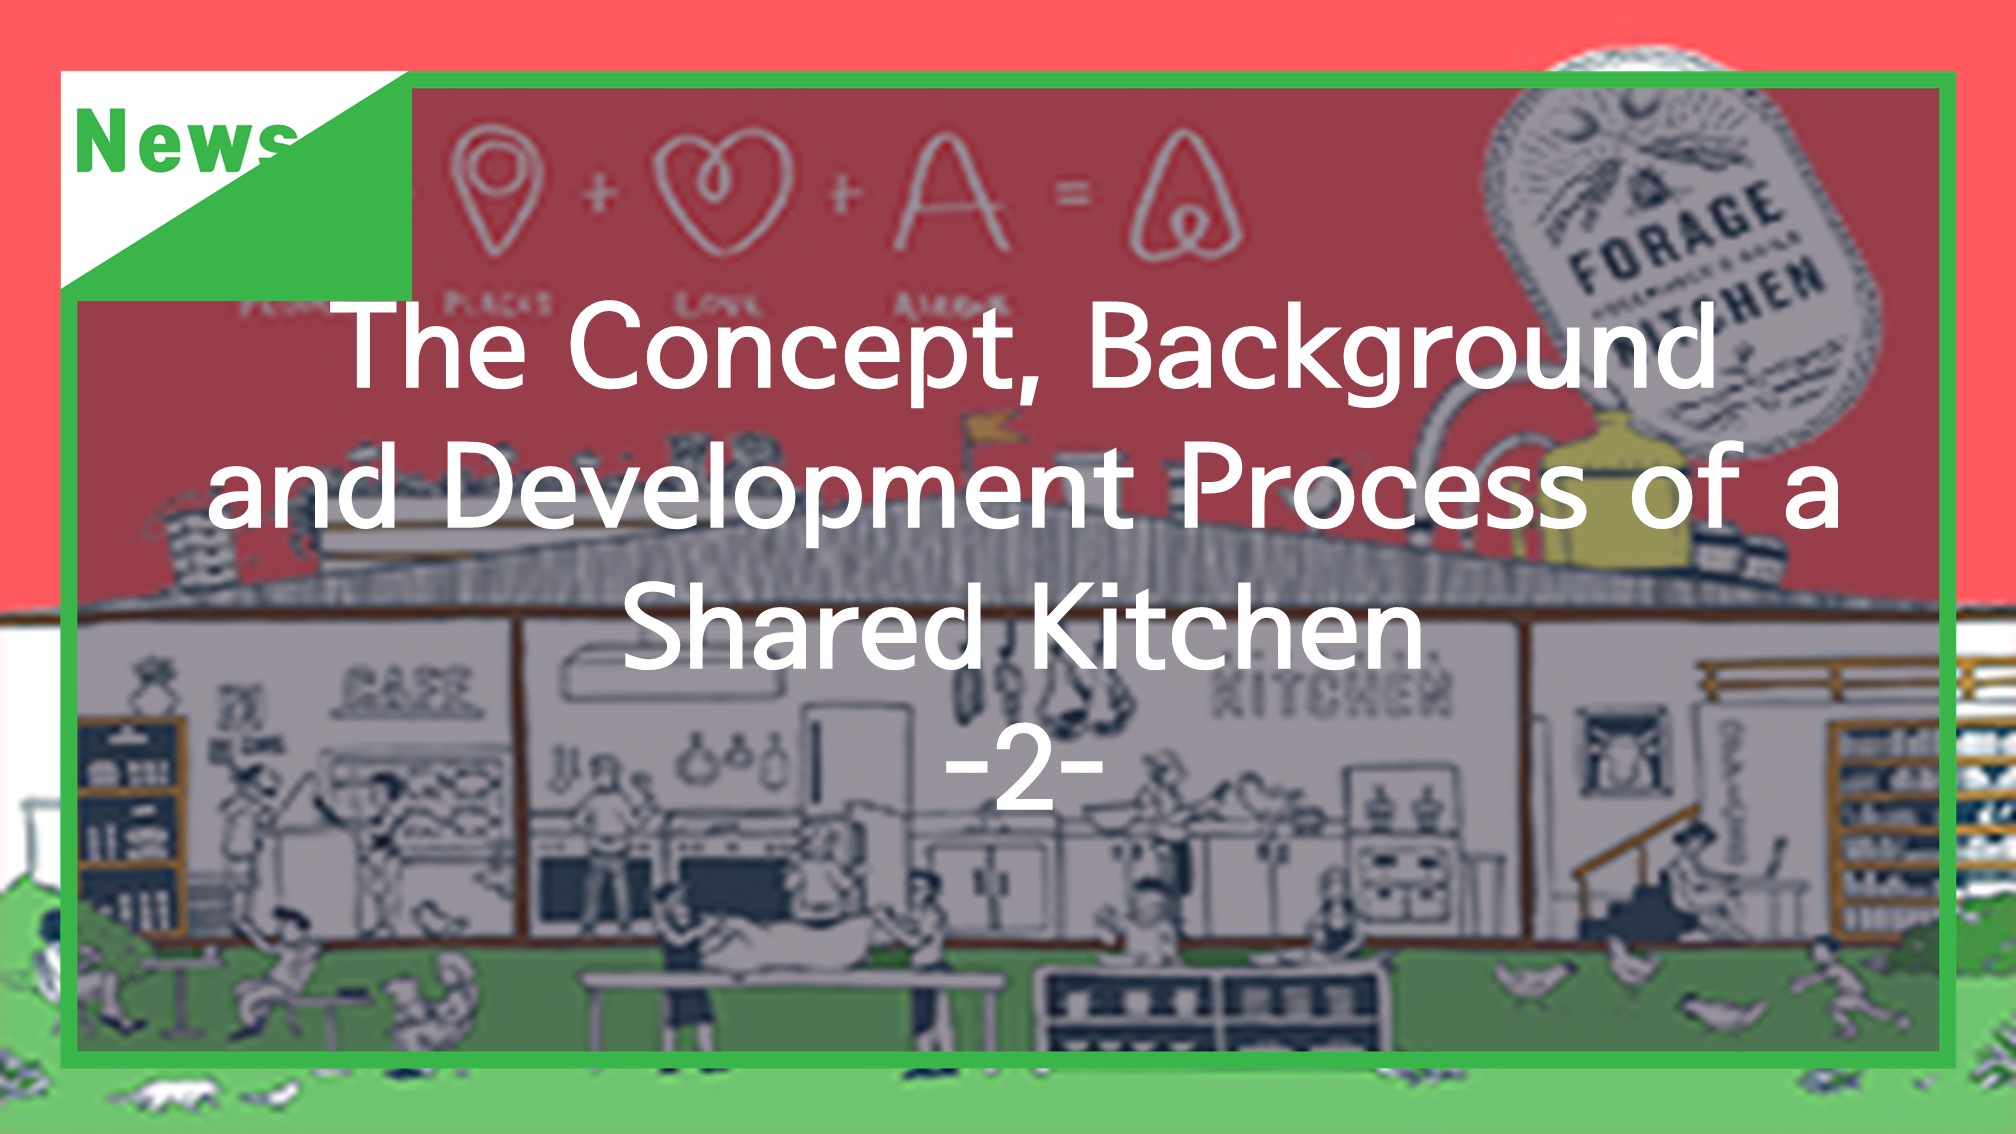 [News] The Concept, Background and Development Process of a Shared Kitchen -2